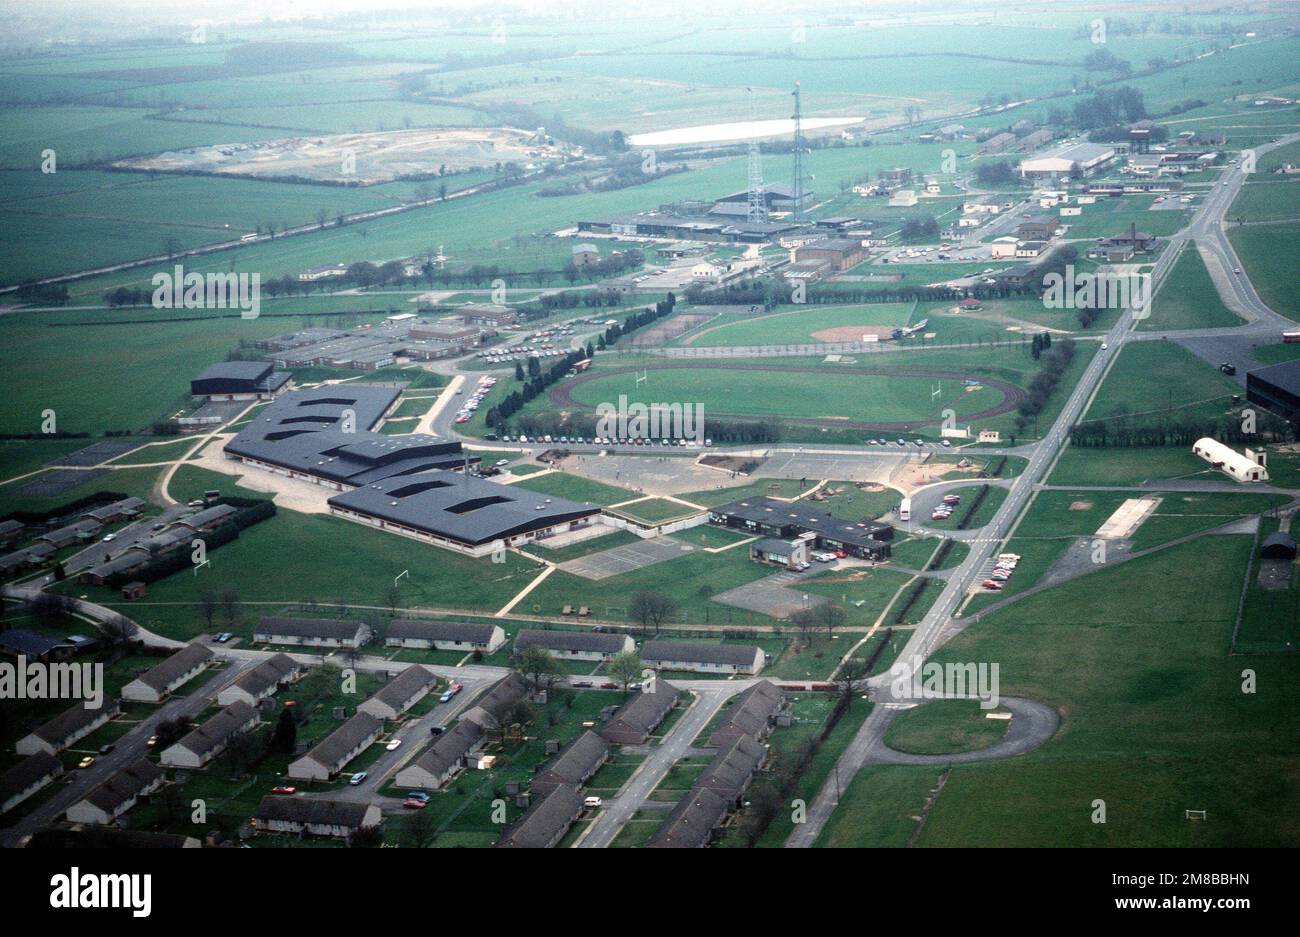 An aerial view of a portion of the base. The 2130th Information Systems Squadron, Air Force Communications Command (AFCC), operates a node of the Defense Communications System at Croughton. Base: Raf Croughton Country: England / Great Britain (ENG) Stock Photo